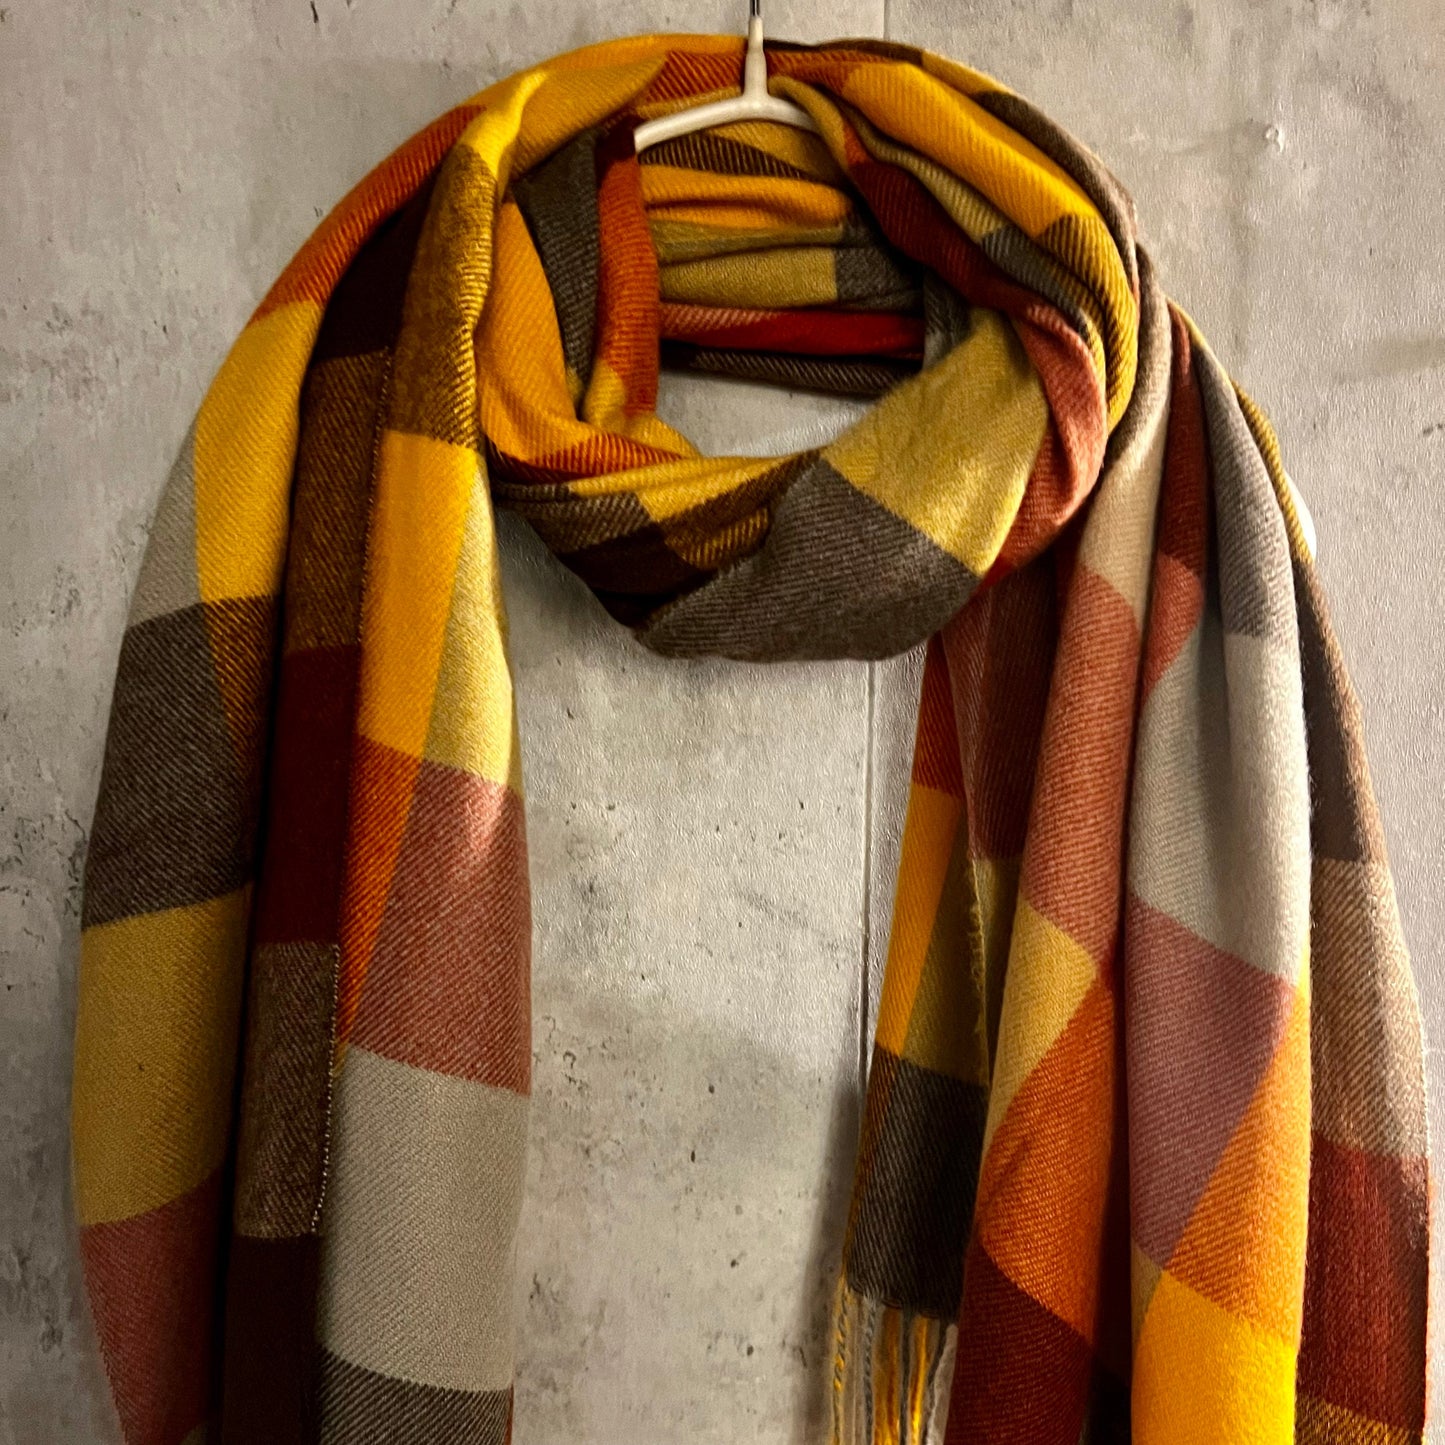 Checked Pattern Yellow Brown Orange Cashmere Blend Scarf/Winter Autumn Scarf/Gifts For Mum/Gifts For Her/Men Scarf/Christmas Birthday Gifts